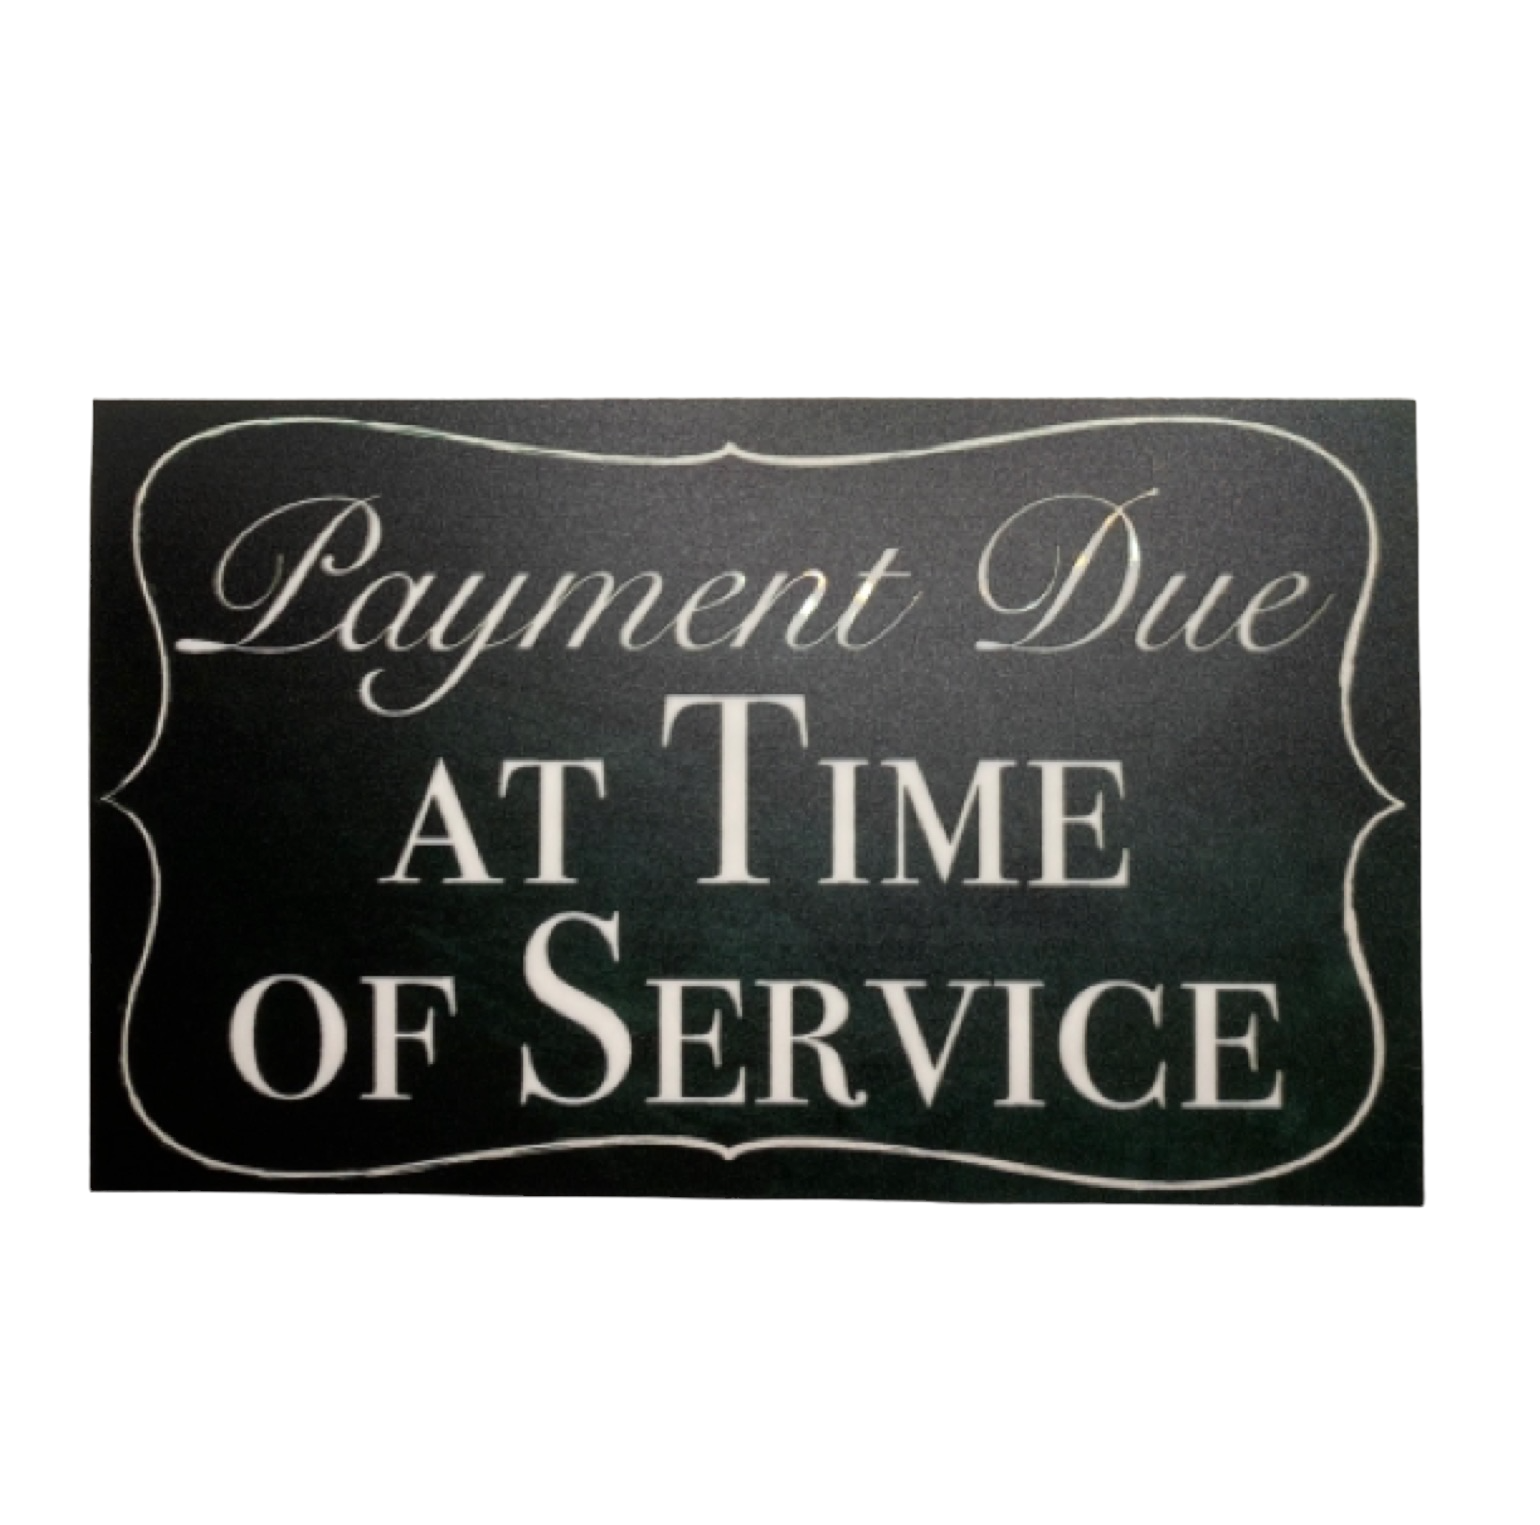 Payment Due At Time of Service Business Sign - The Renmy Store Homewares & Gifts 